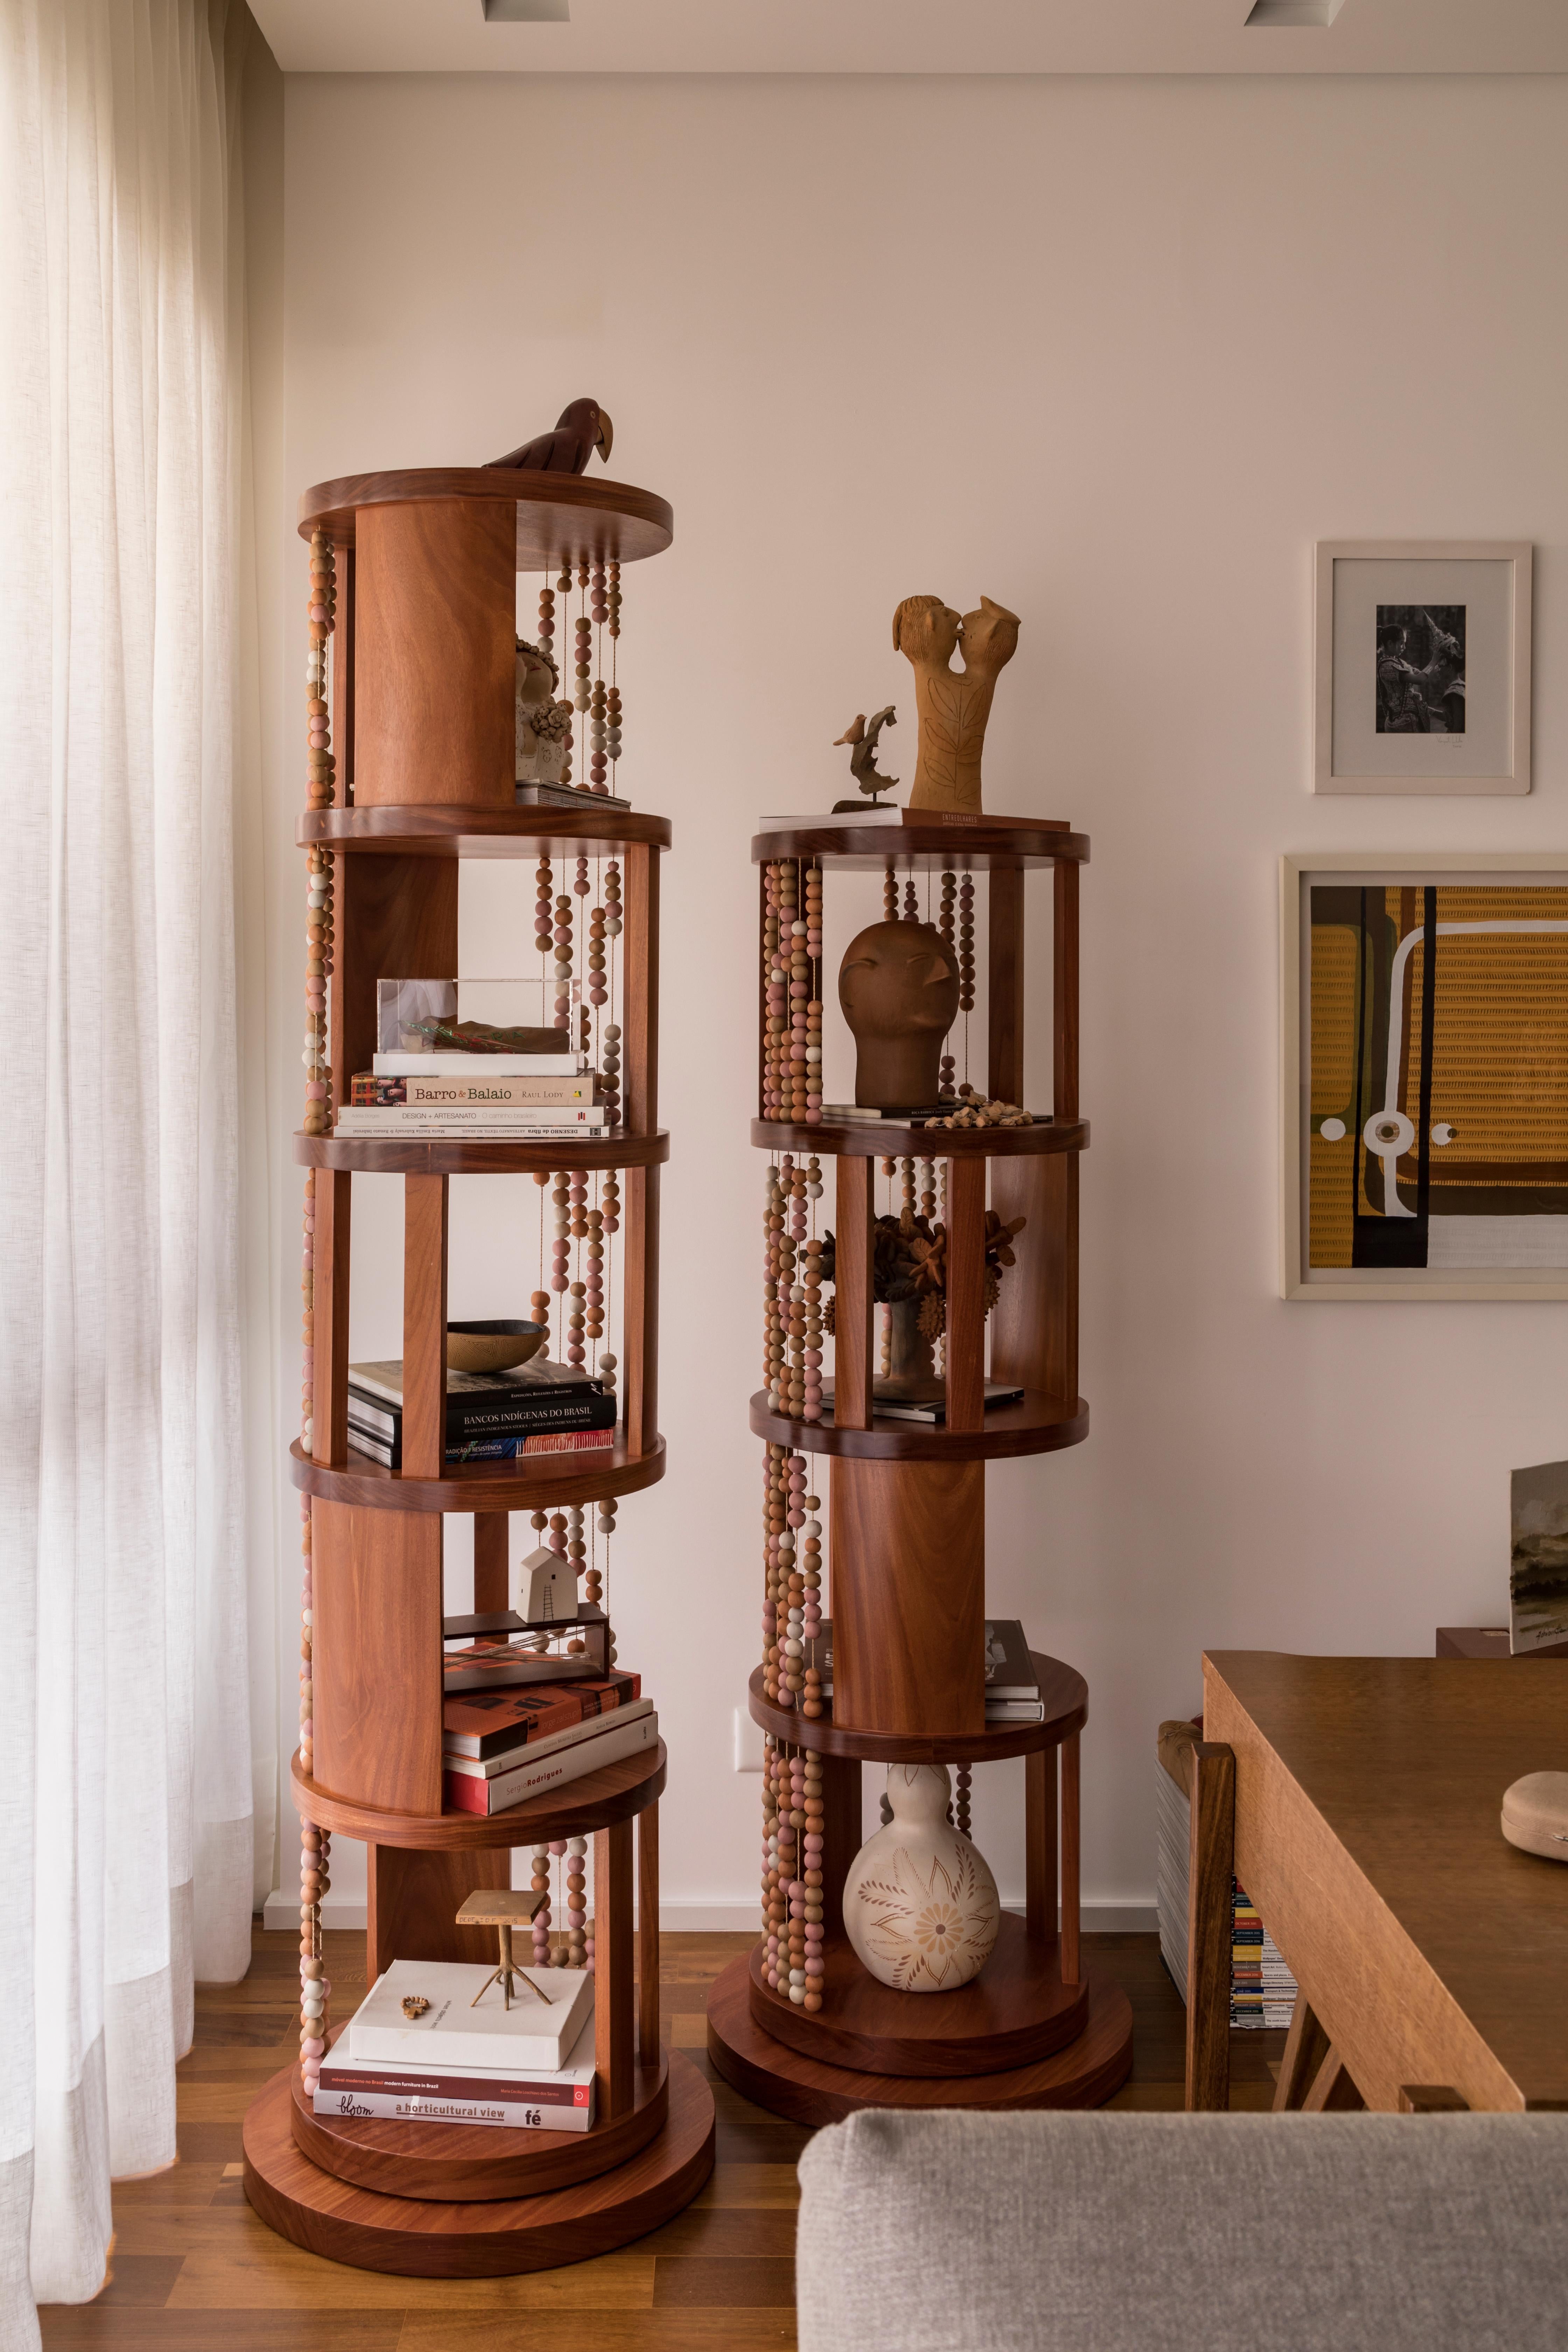 Contemporary Contas Round Swivel Bookcase in Cabreuva wood - With artisans from Brazil